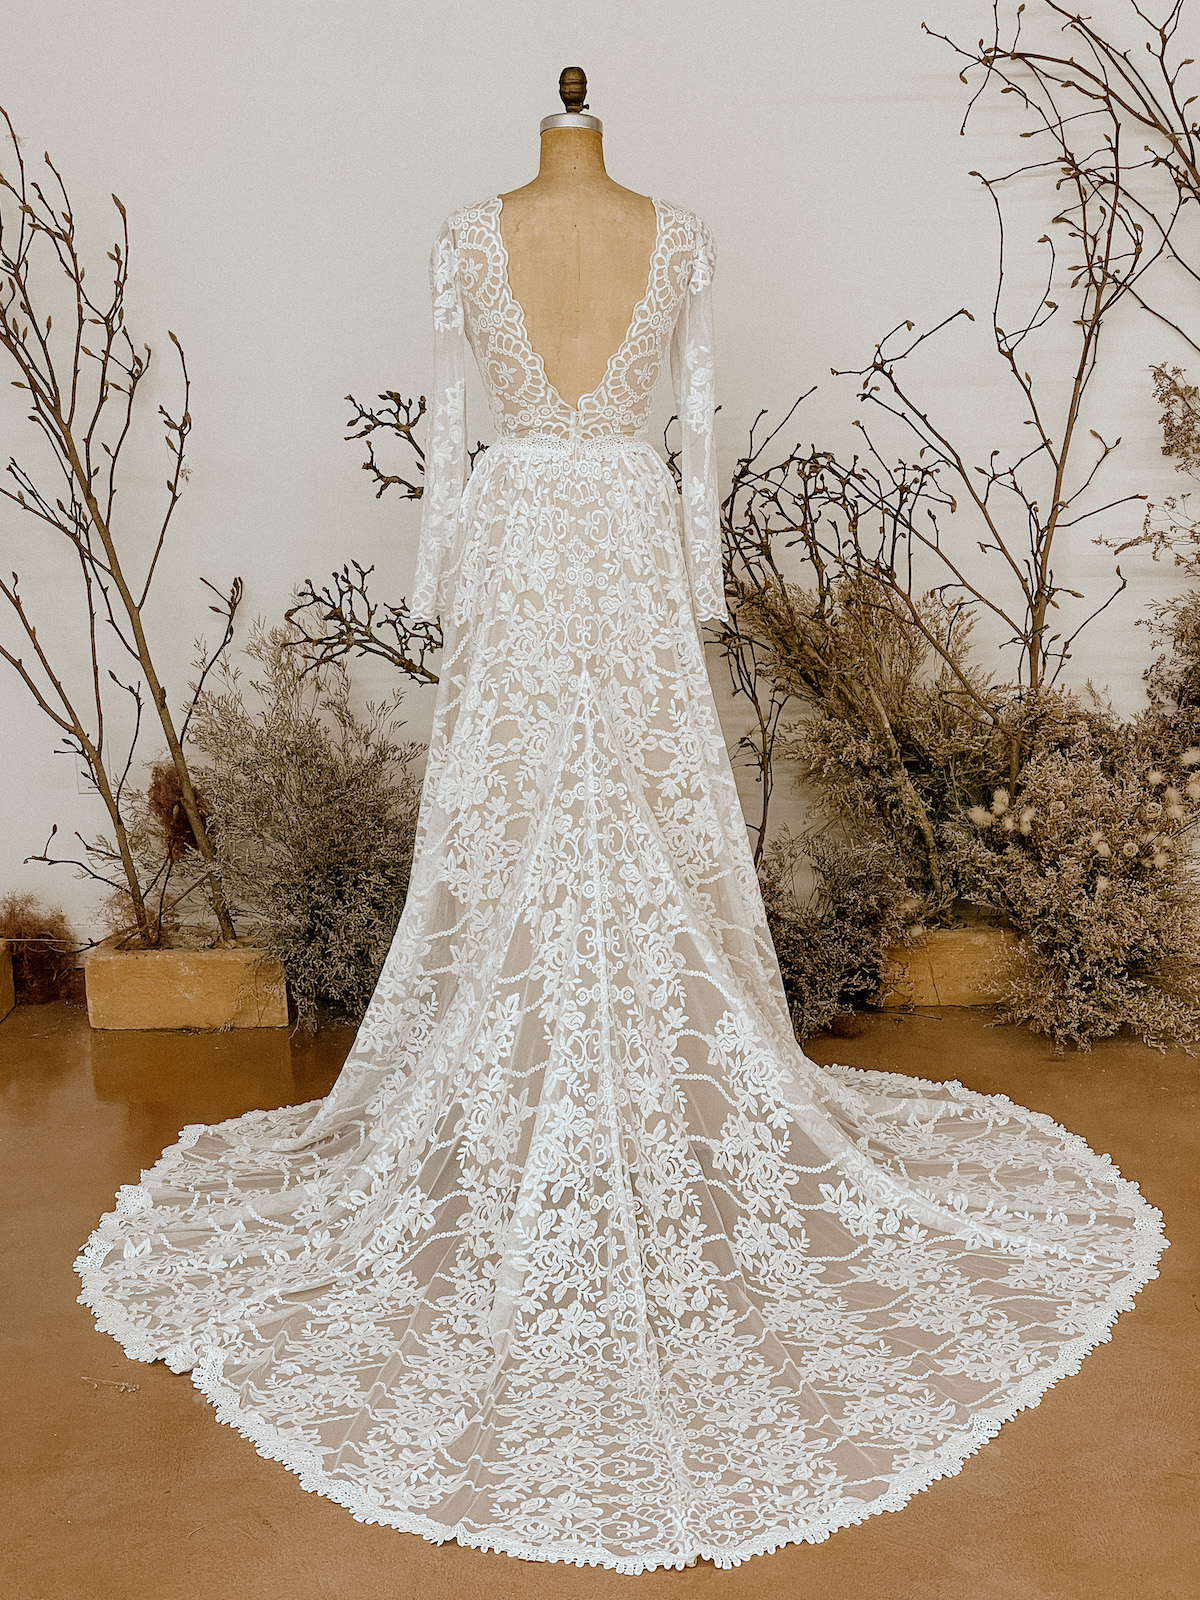 Dahlia-elegant-lace-wedding-dress-shown-with-nude-colored-liner